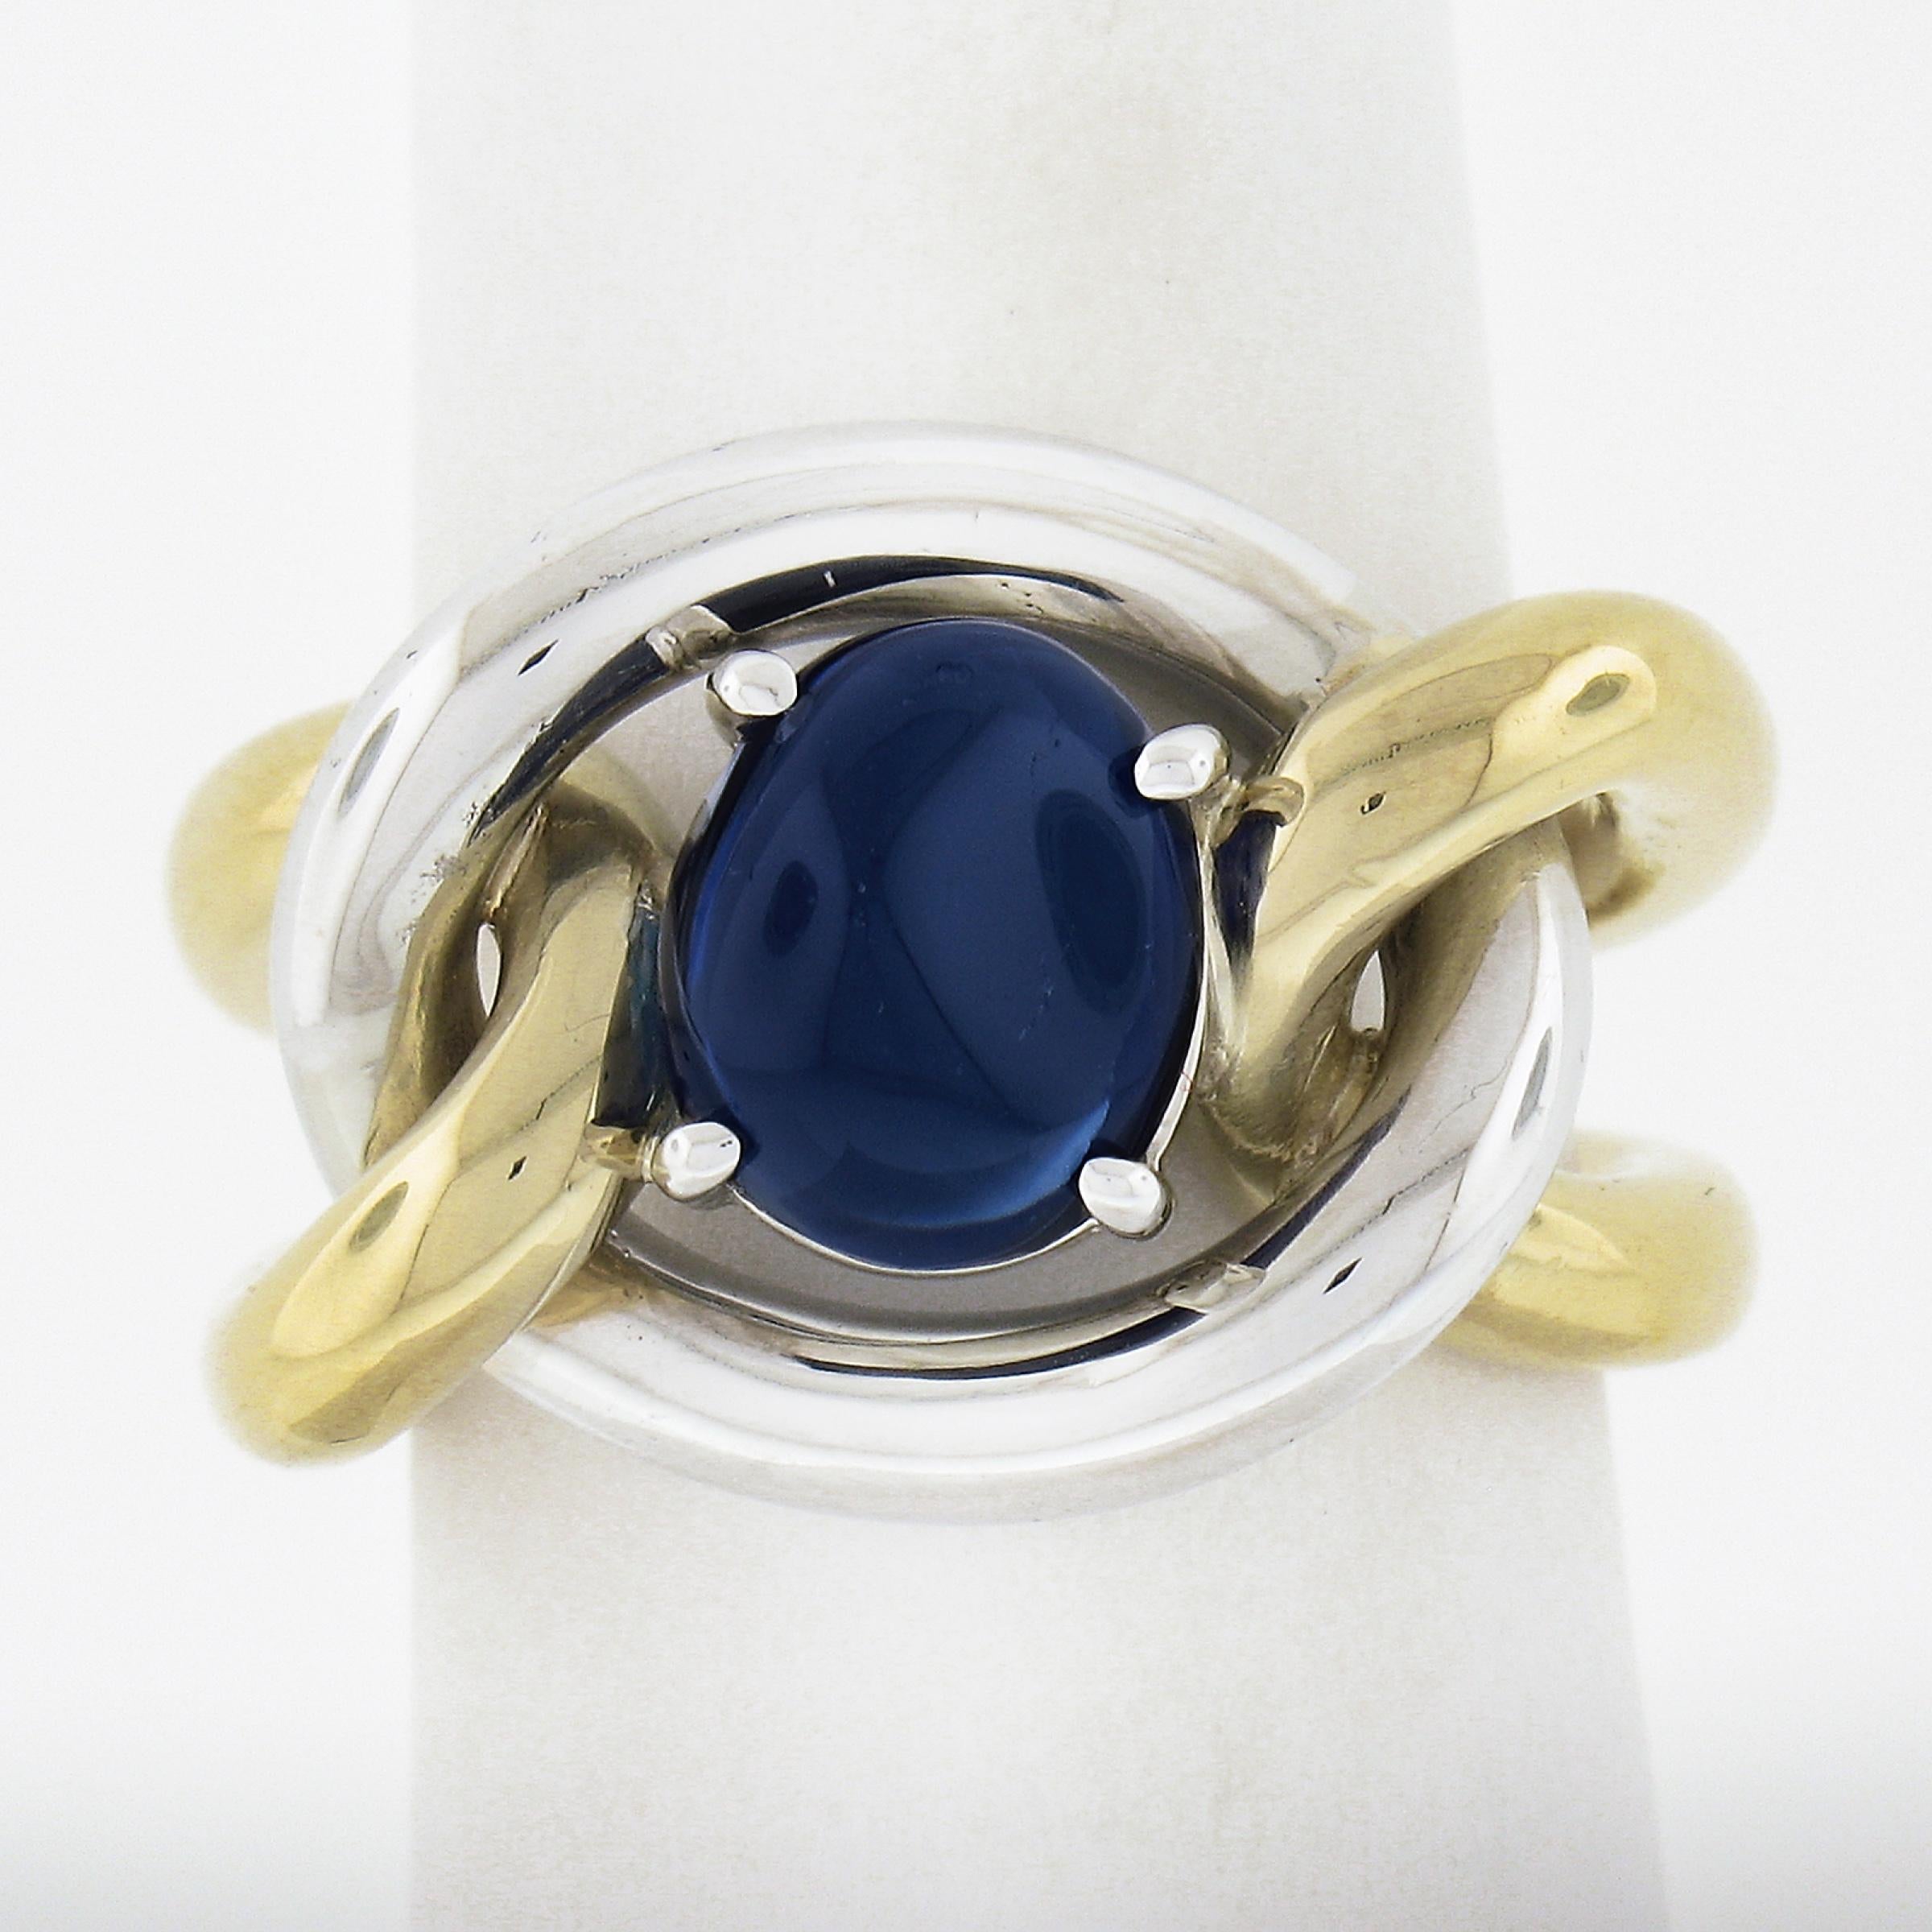 This stunner of a sapphire cocktail ring is very well crafted and handmade in solid 18k gold and features a mesmerizing oval cabochon sapphire solitaire carefully claw-prong set the center of the knot design. The sapphire has been certified by GIA.